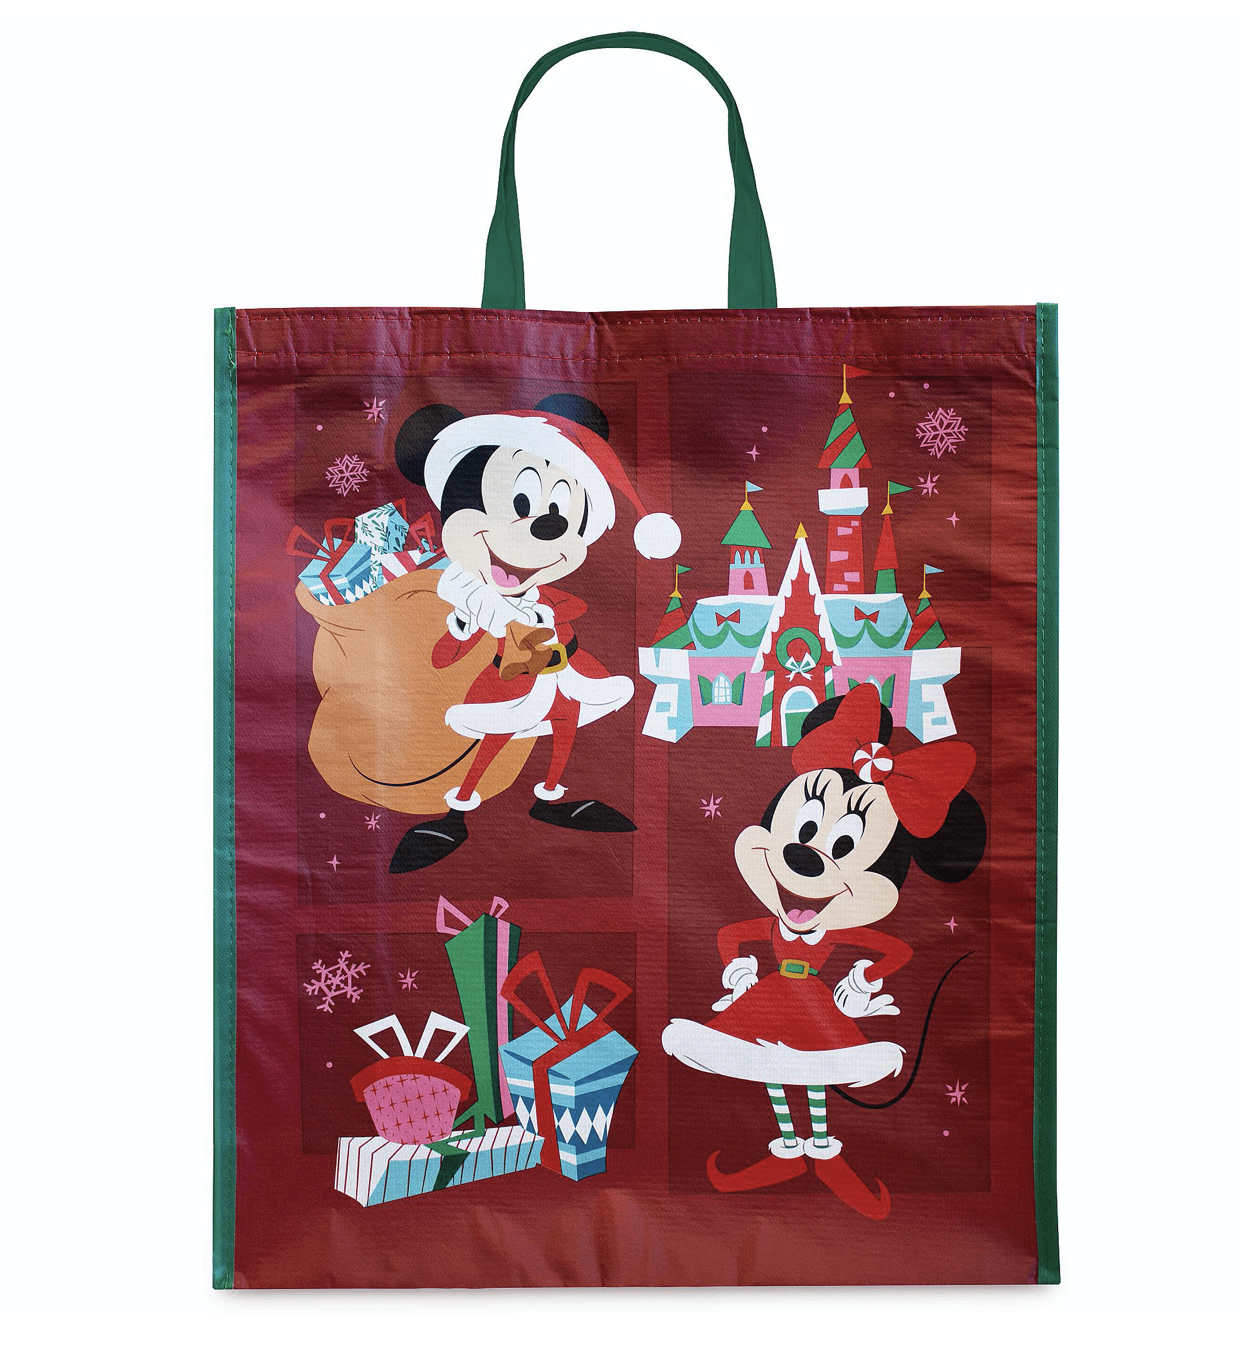 MICKEY MINNIE MOUSE Navy BLUE Eco Grocery NEW DISNEY Store reusable TOTE BAG 